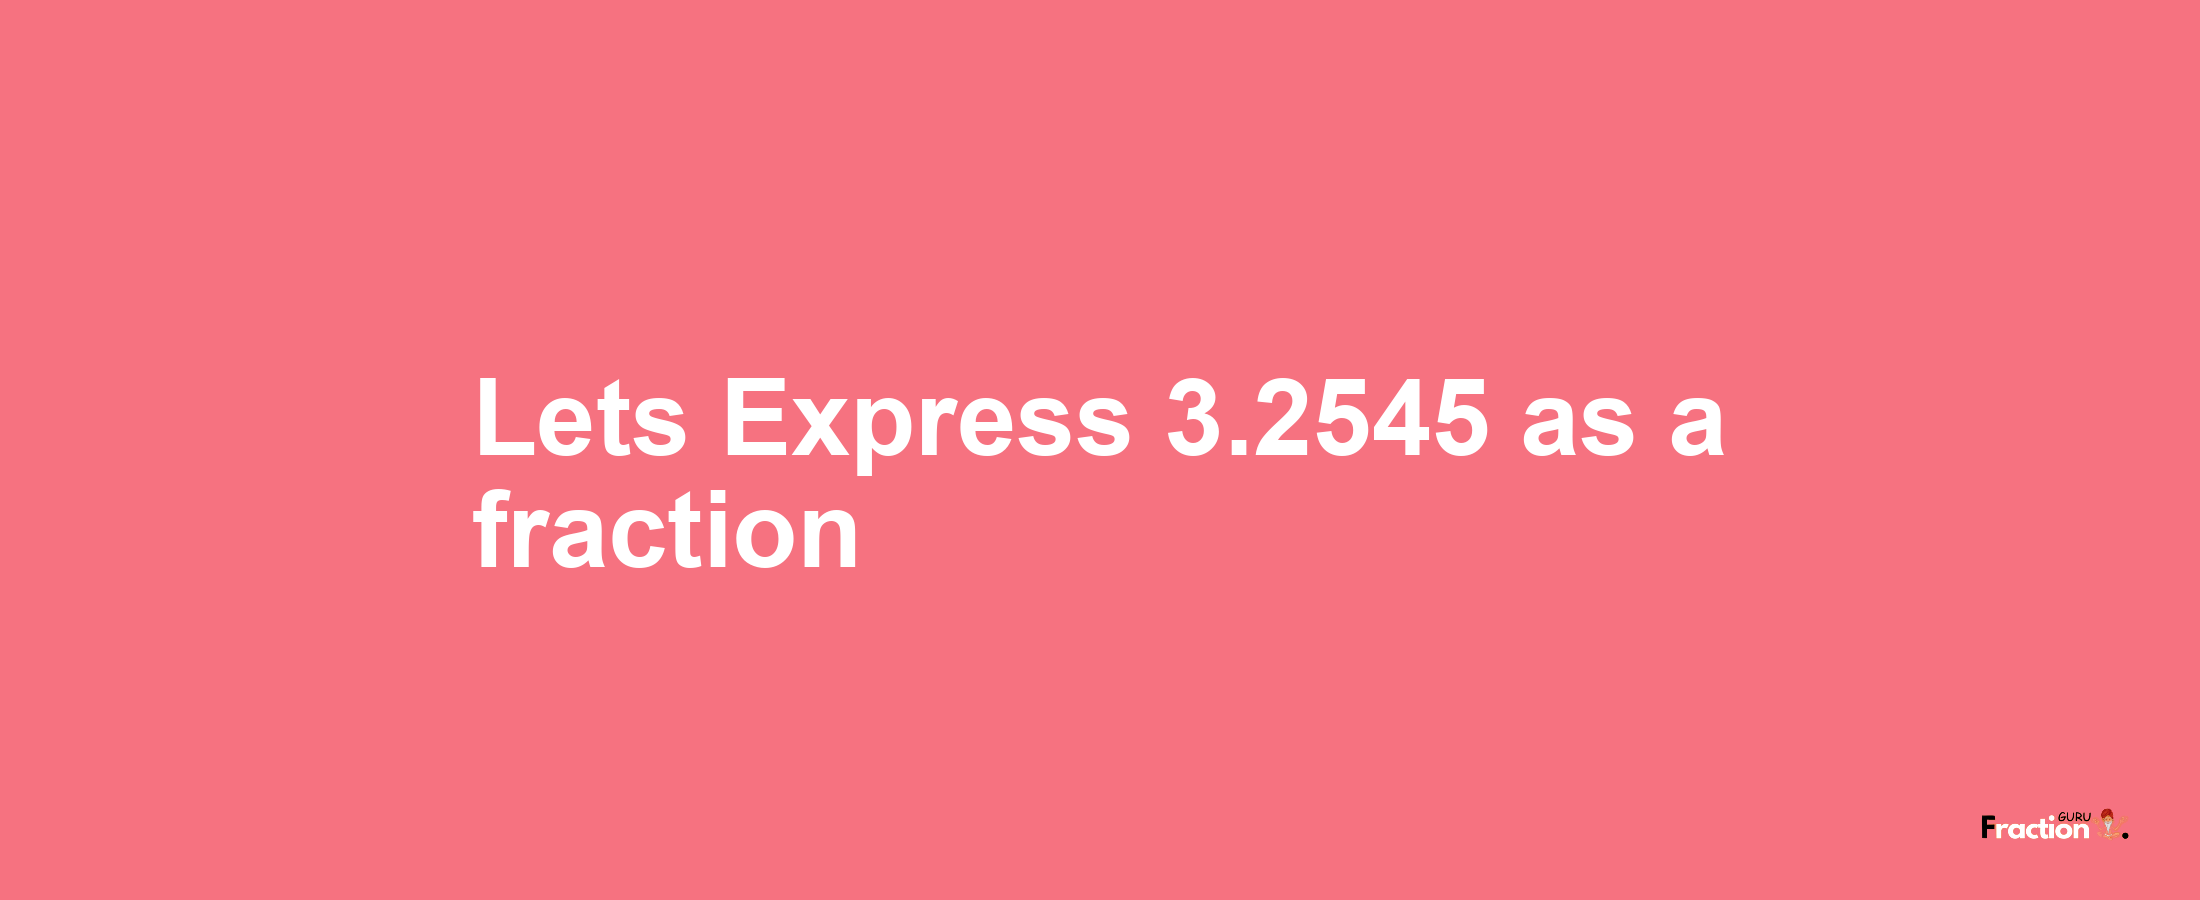 Lets Express 3.2545 as afraction